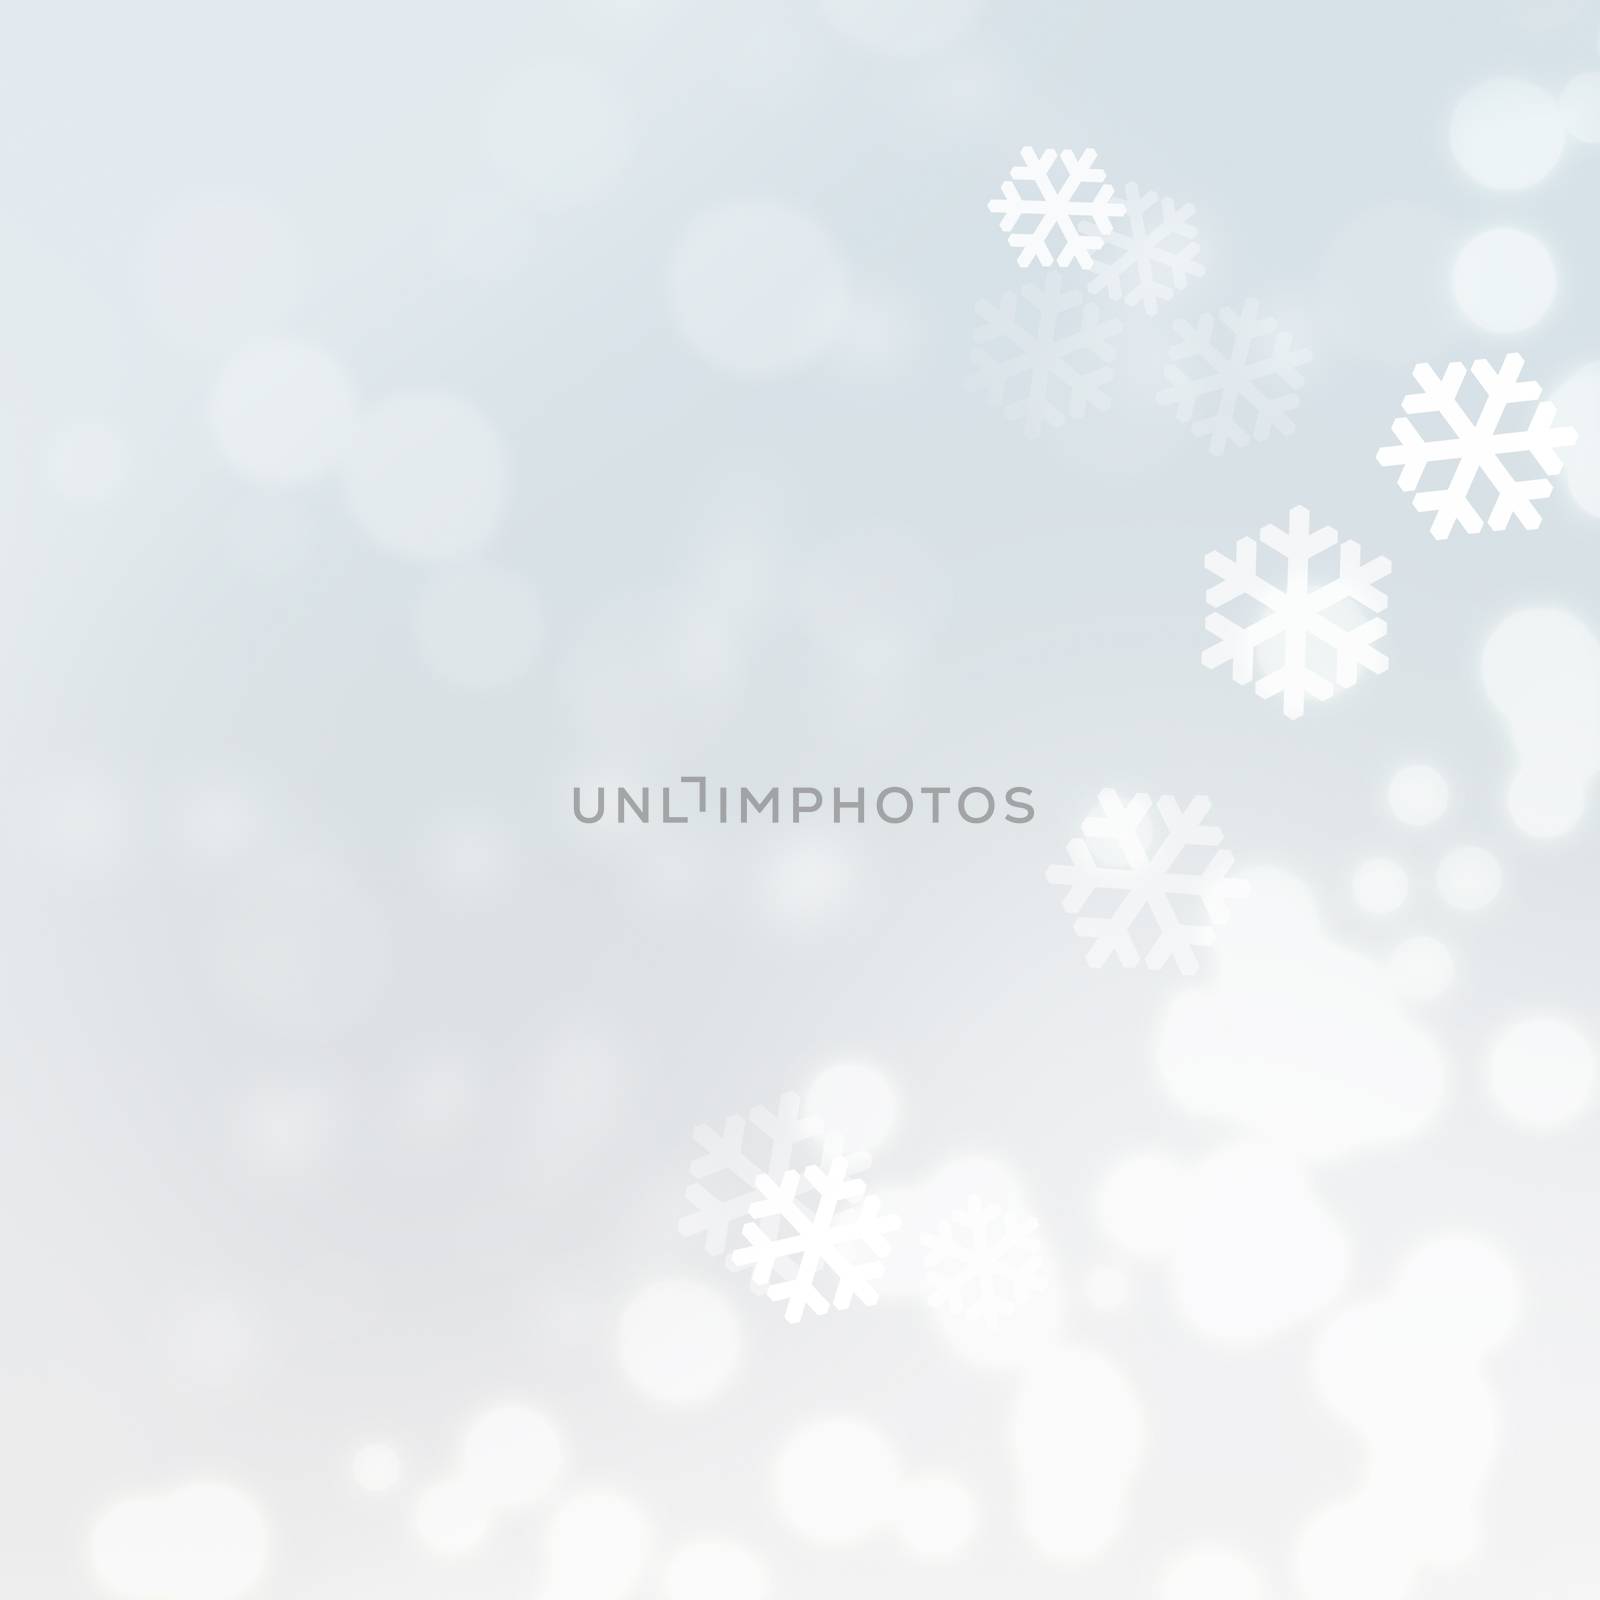 Bokeh festive christmas background with snow flakes by simpson33